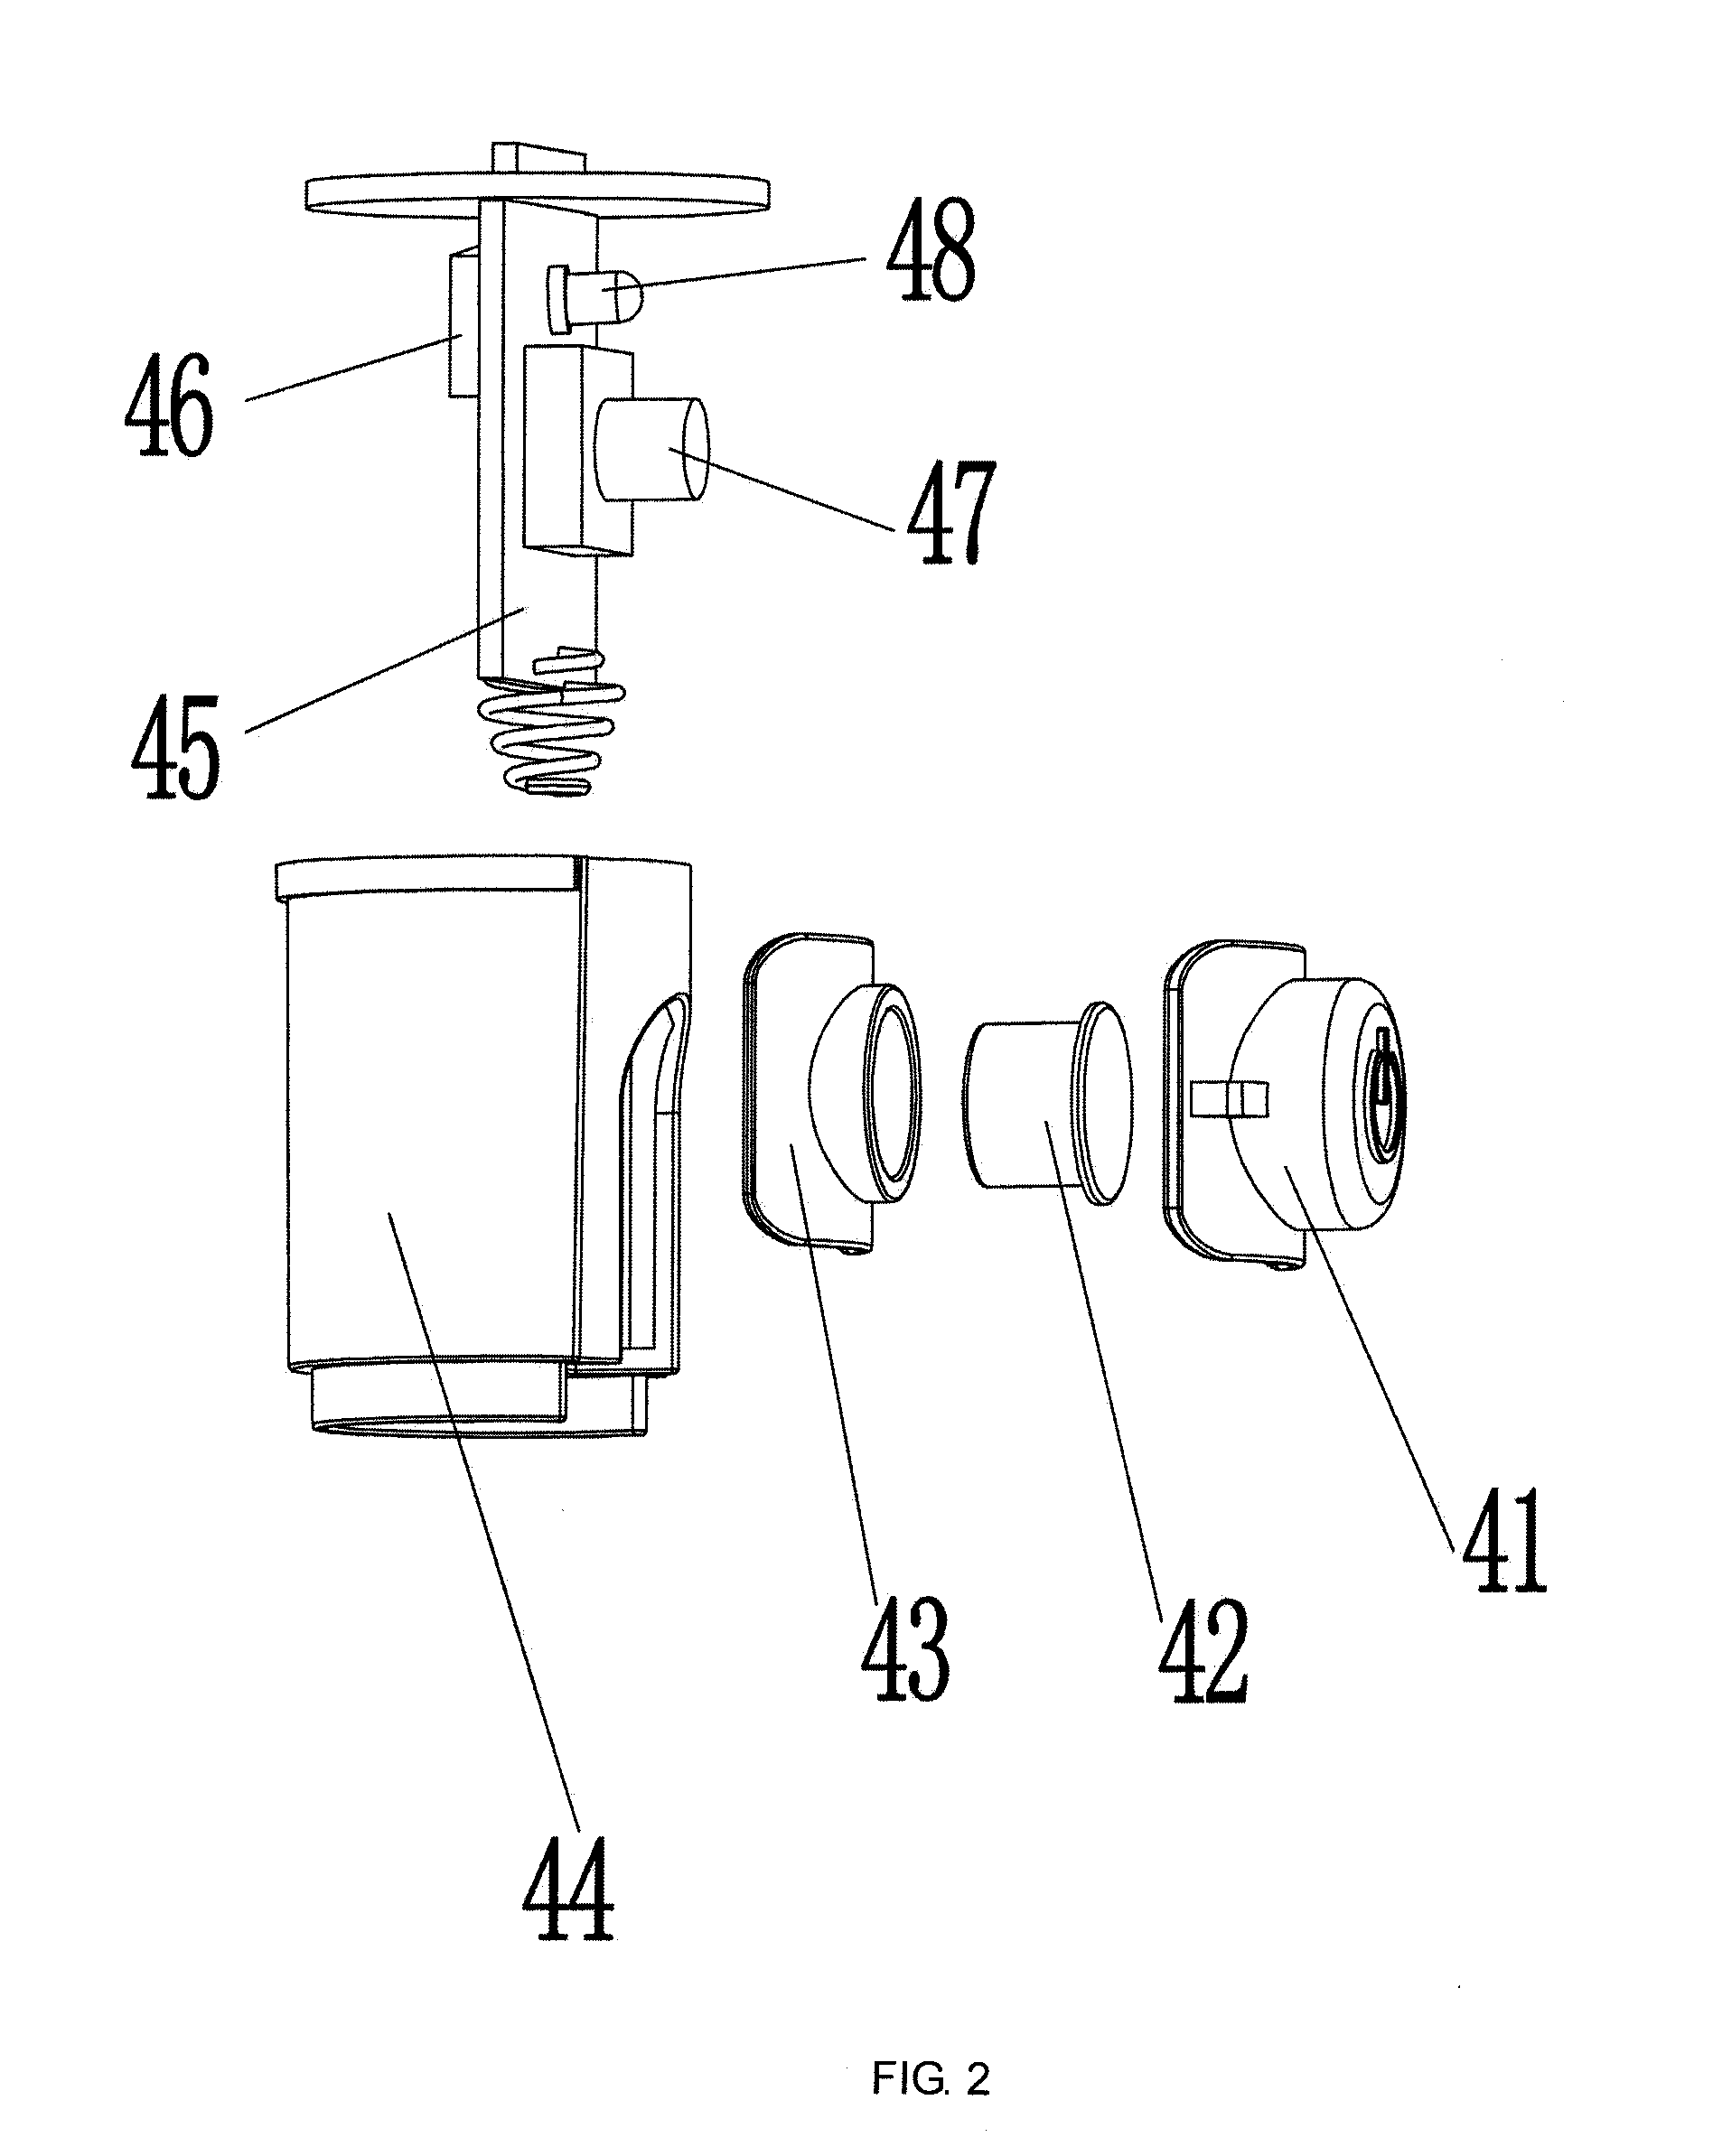 Gravity sensing flashlight and its electric control circuit